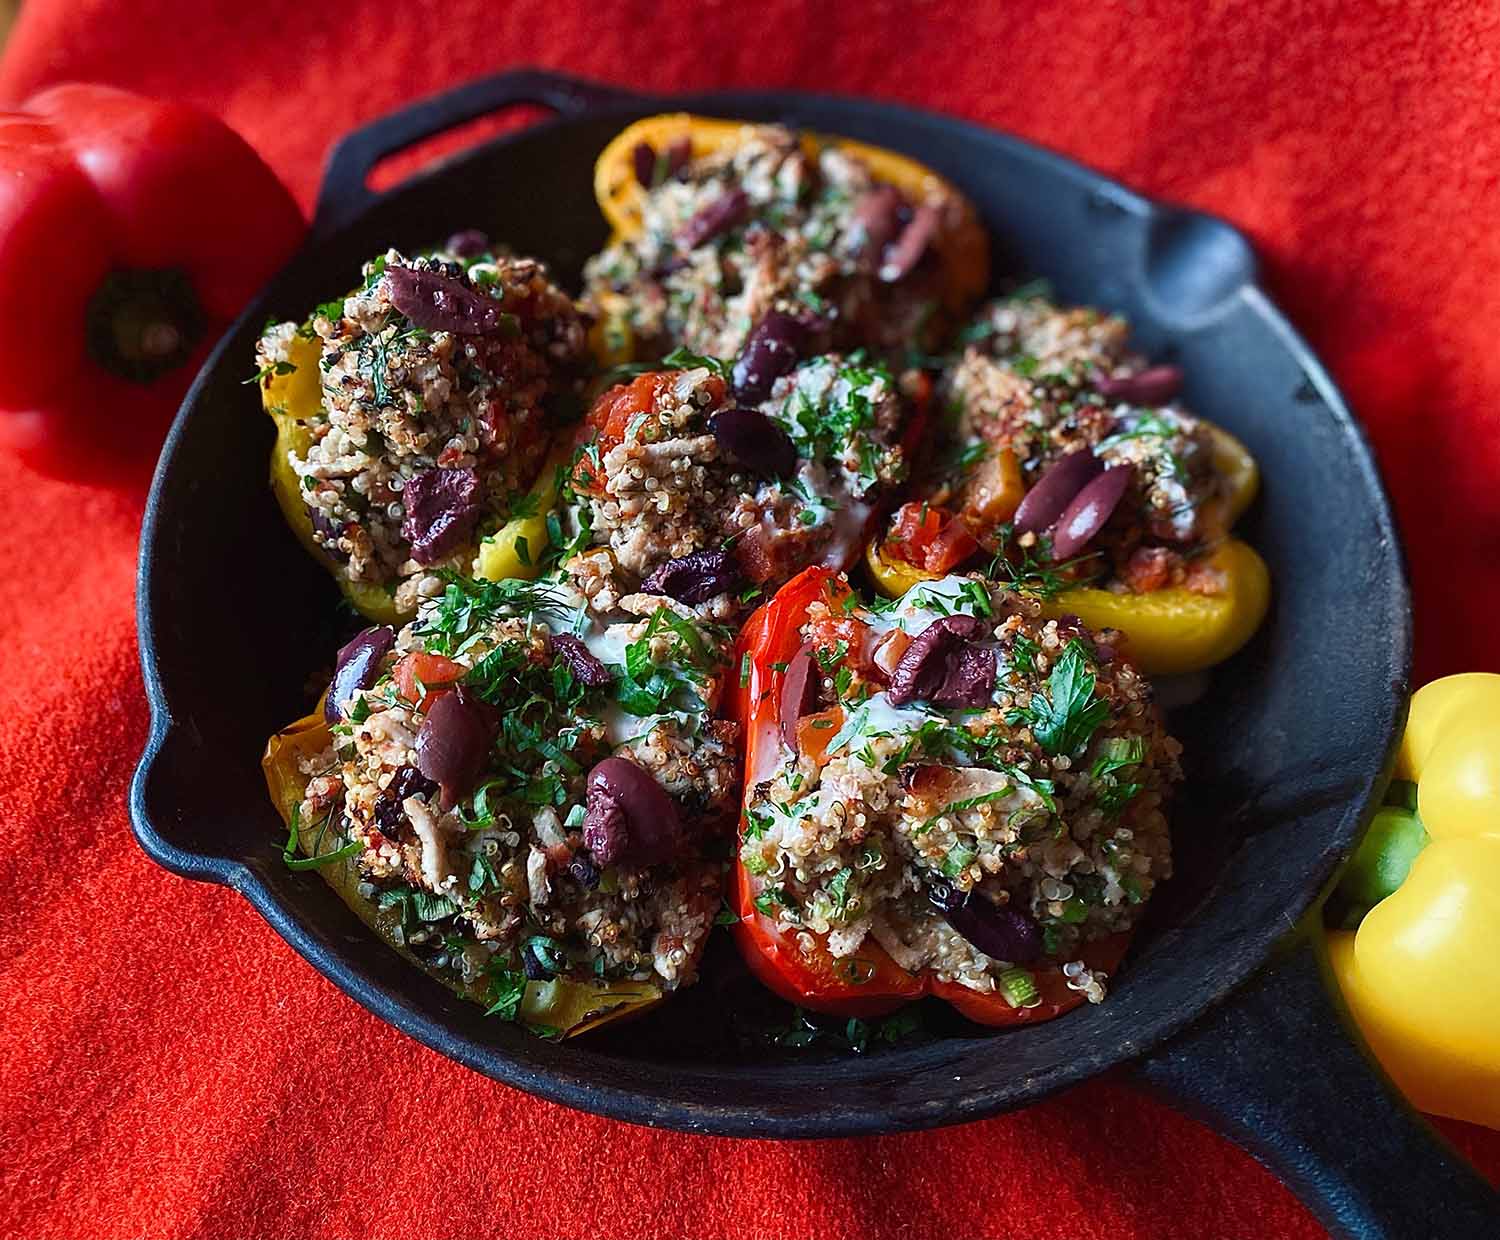 Red and yellow bell peppers stuffed with turkey, quinoa, olives, and herbs, in a cast iron pan, placed on a red linen background.